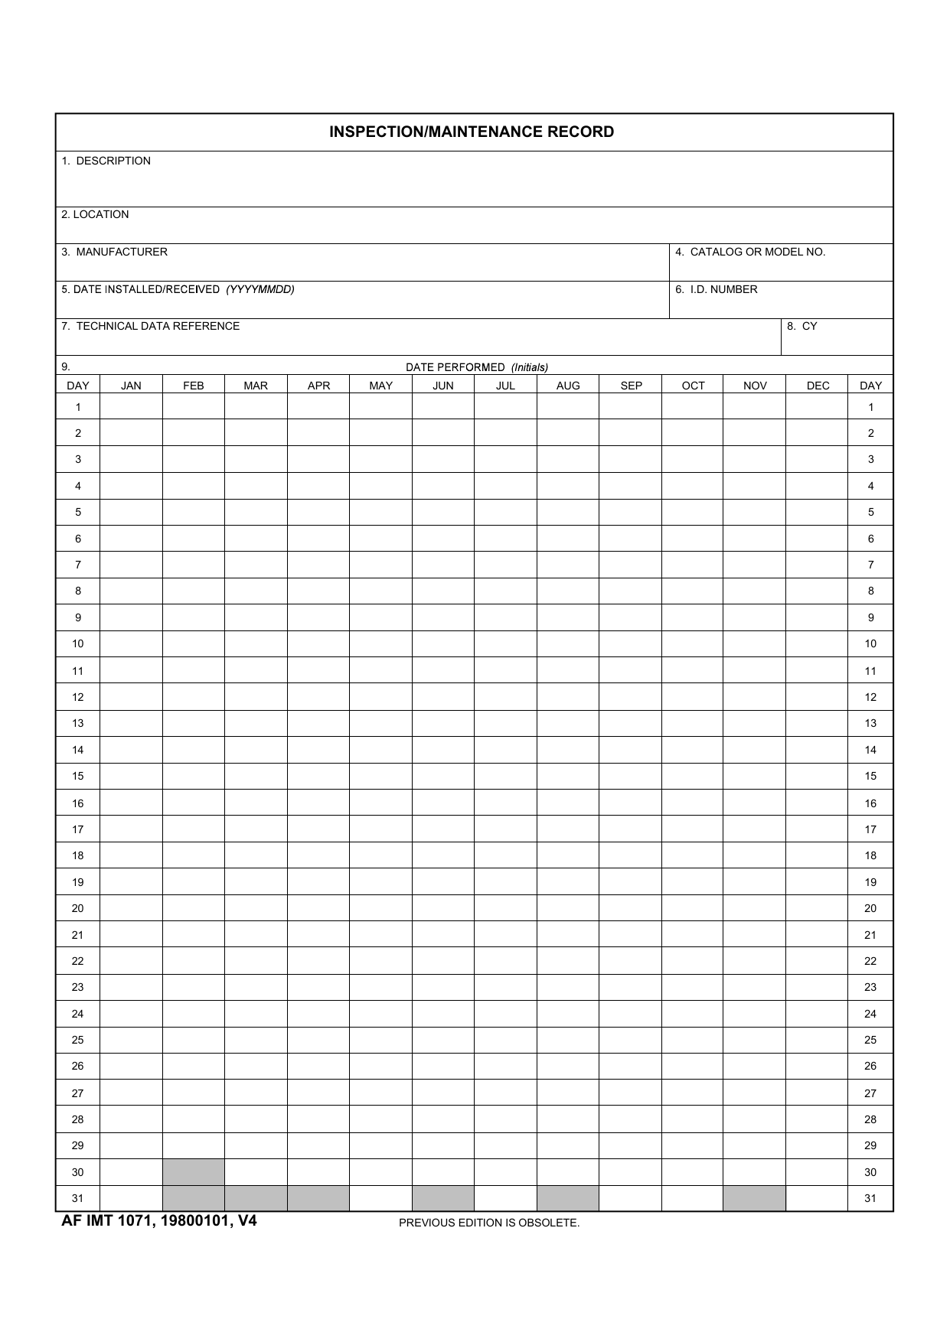 AF IMT Form 1071 Inspection / Maintenance Record, Page 1